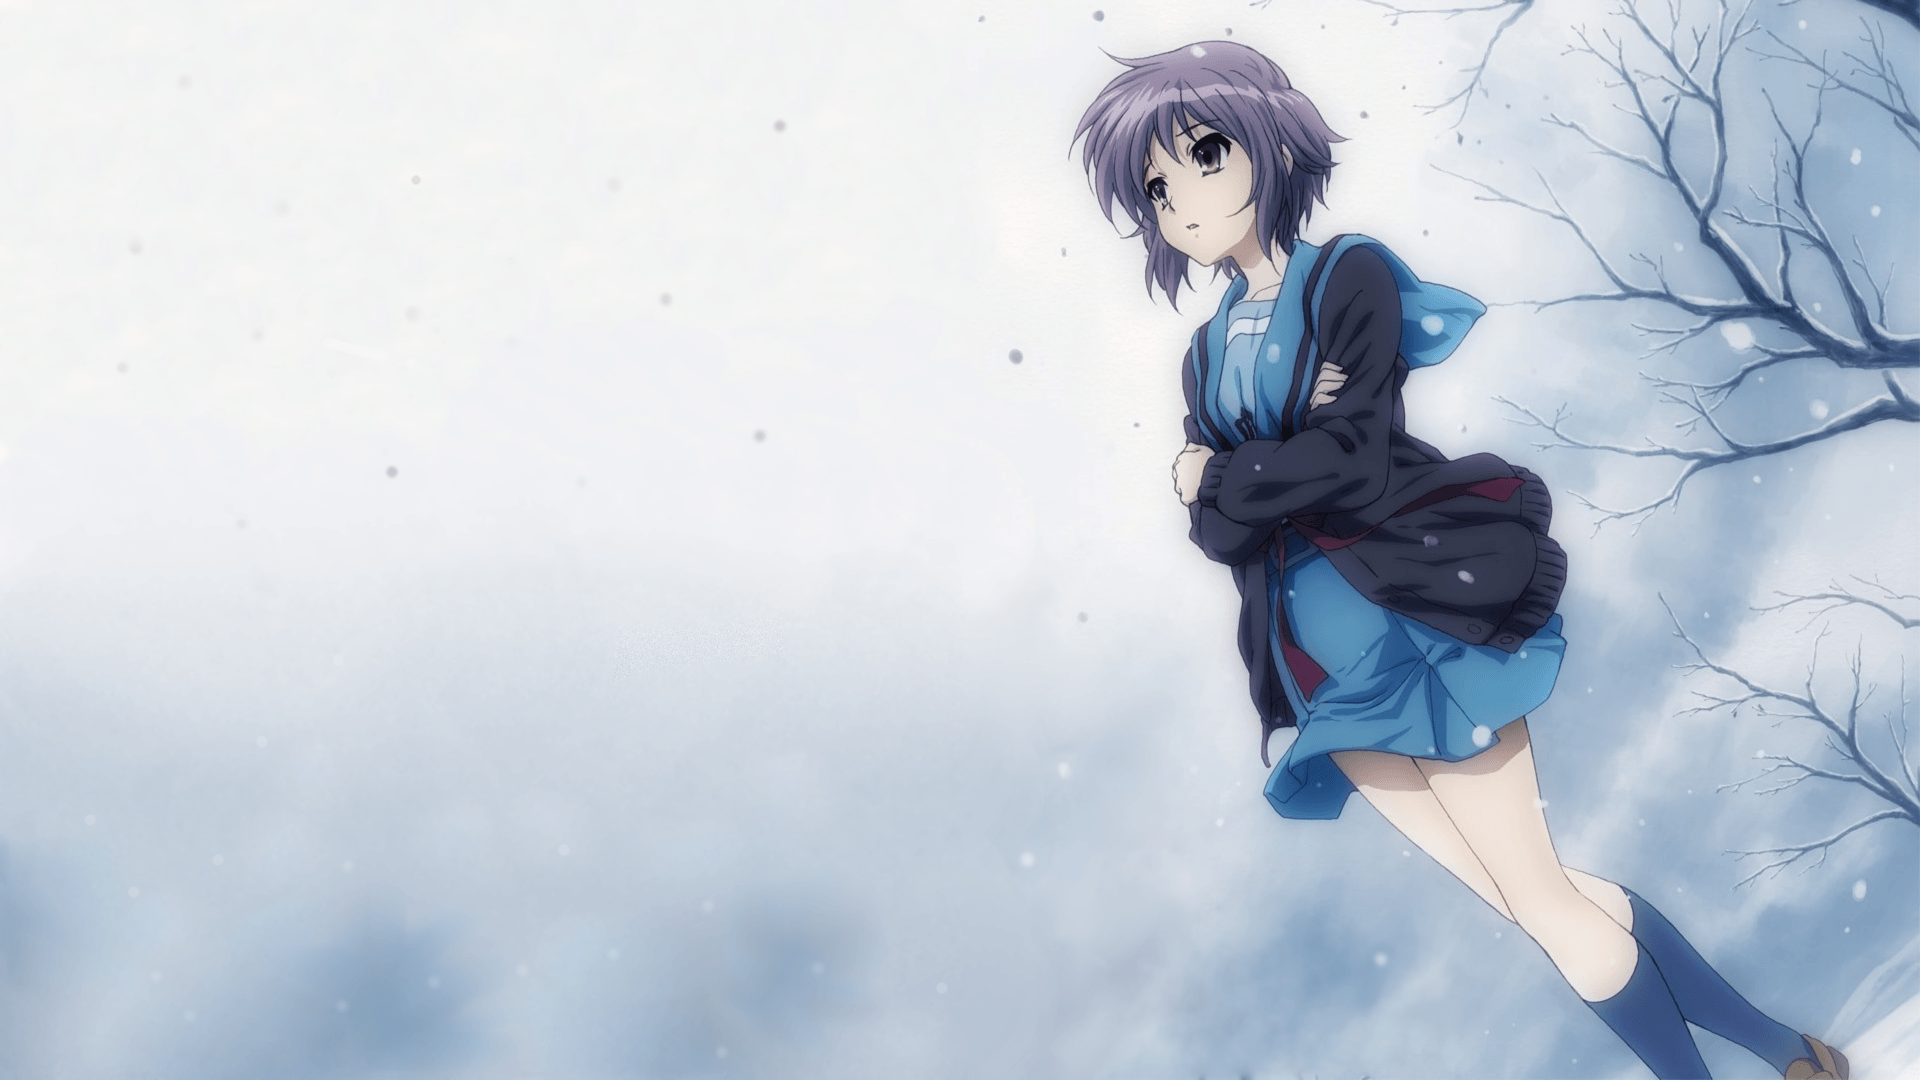 Anime Girls Wallpaper HD Picture. One HD Wallpaper Picture